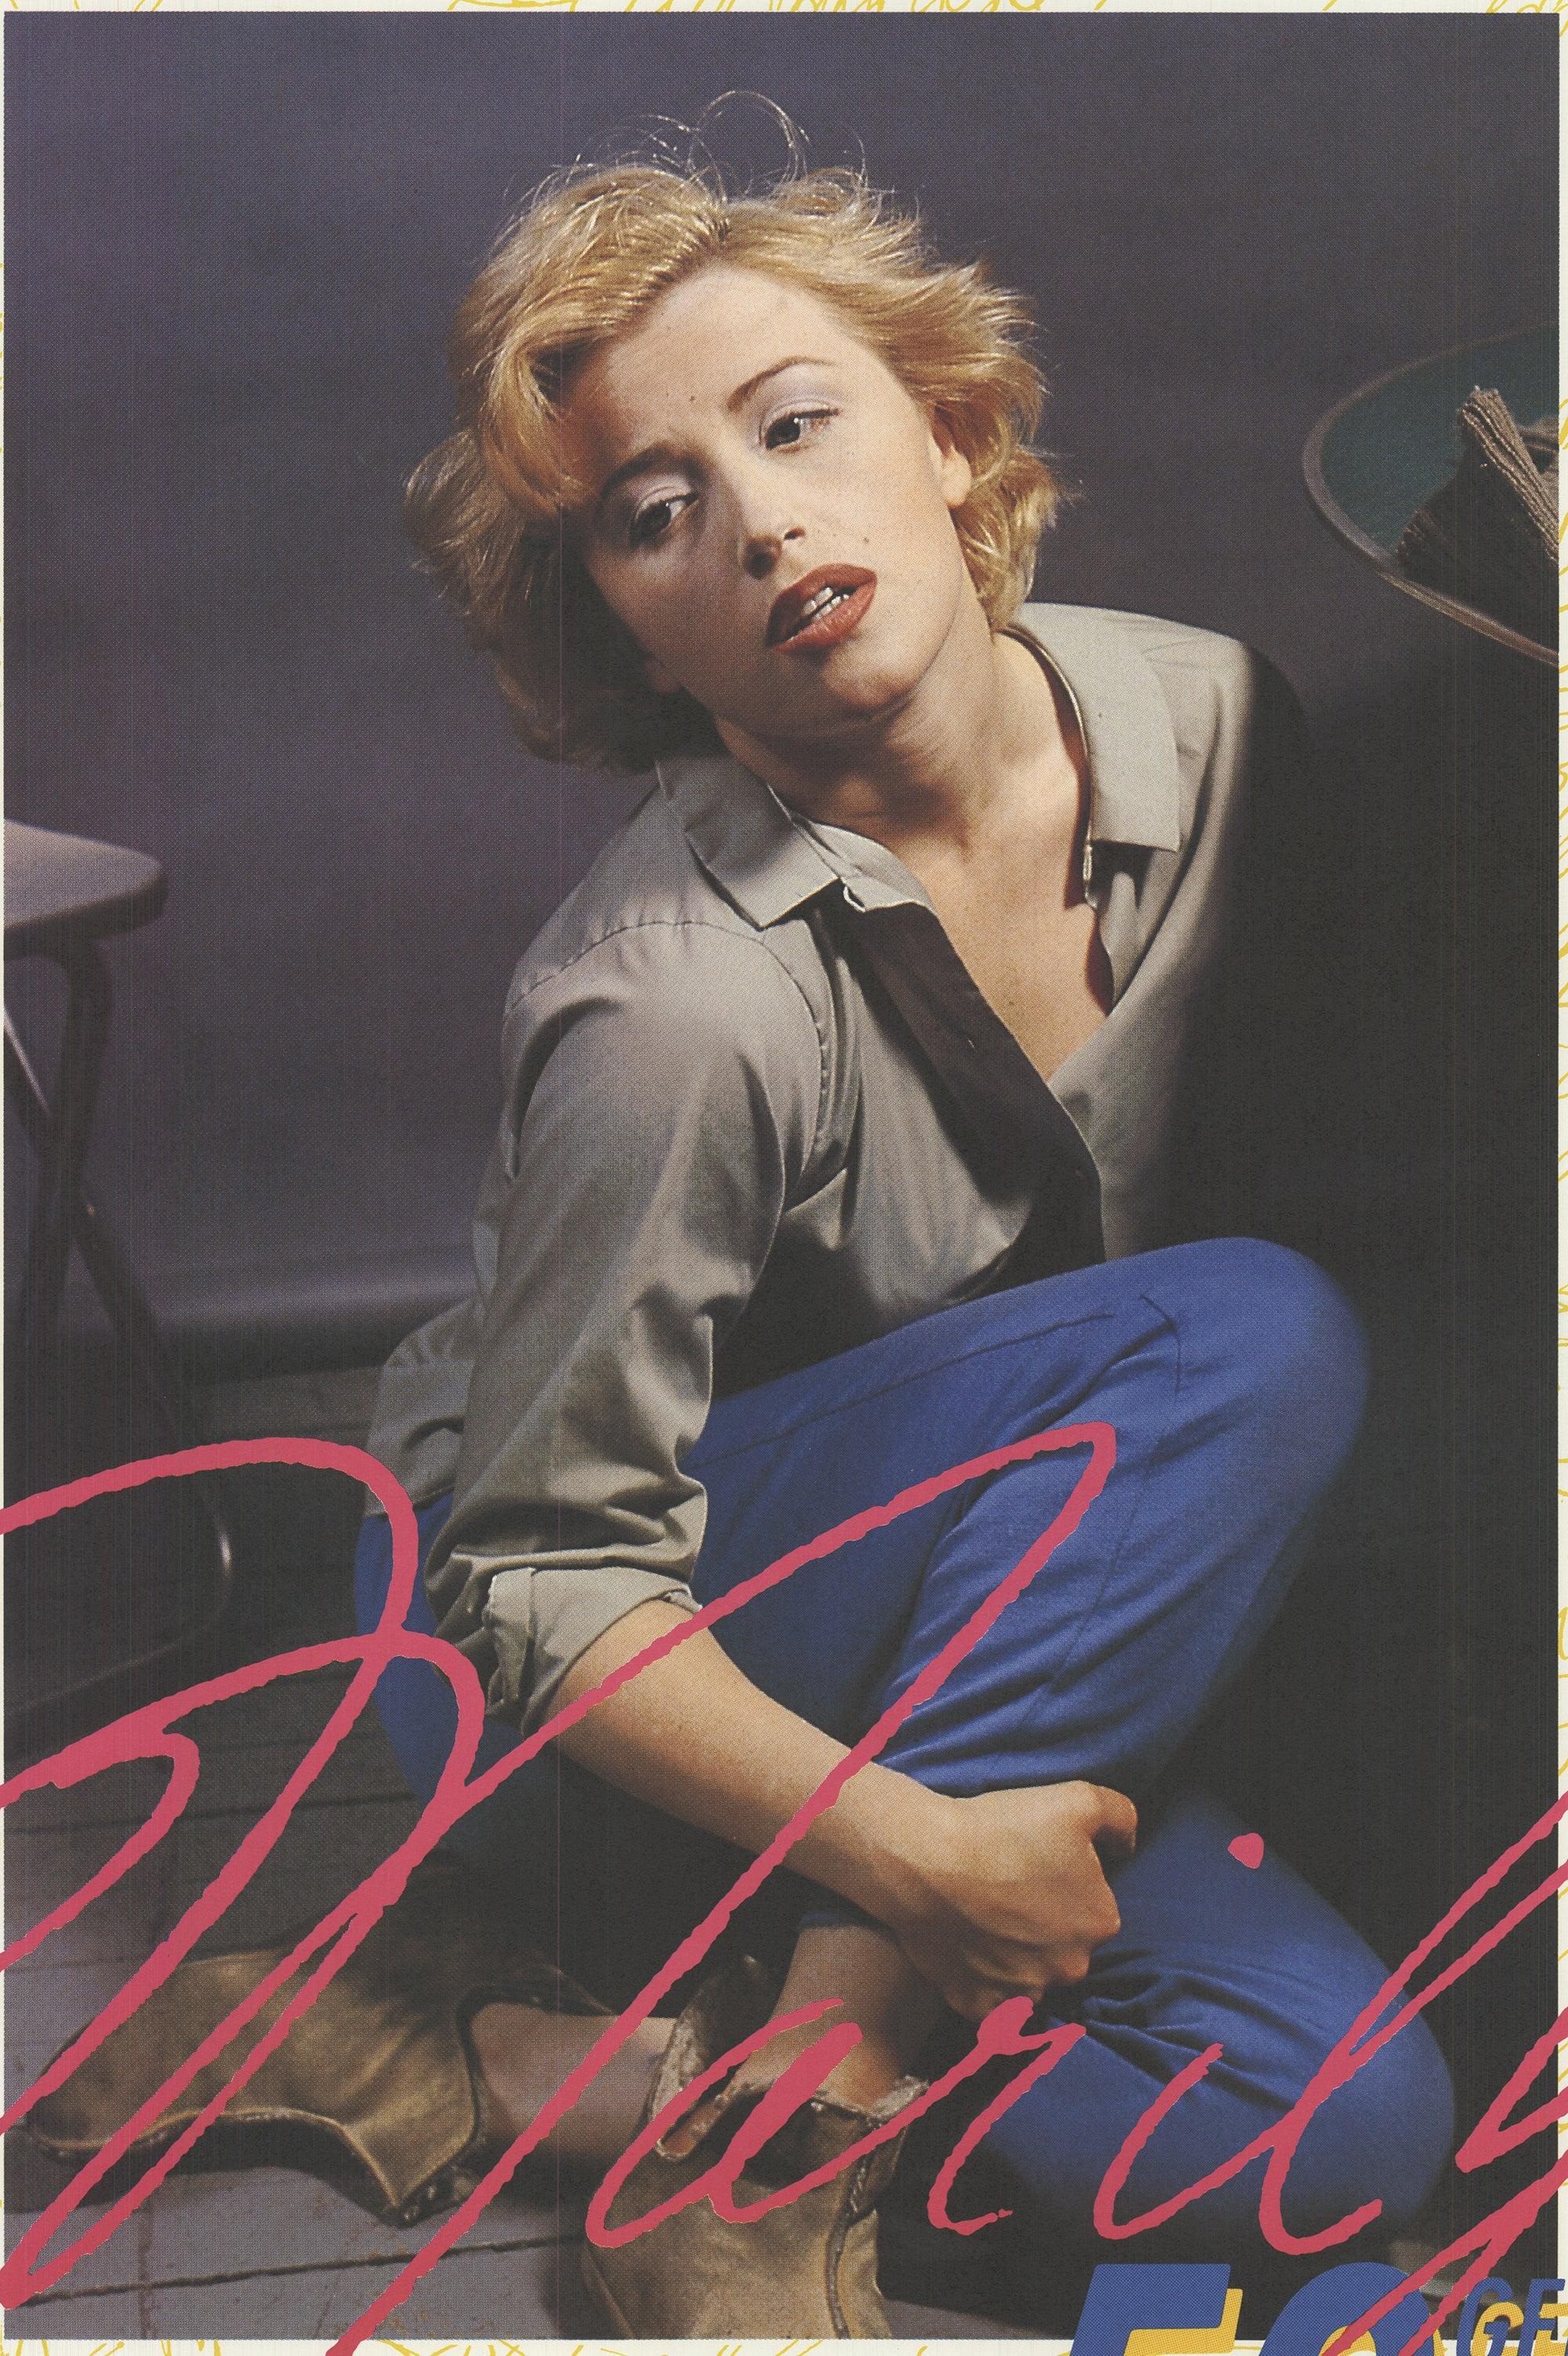 1982 Cindy Sherman 'Marilyn' Contemporary Yellow, Blue Germany Offset Lithograph For Sale 2